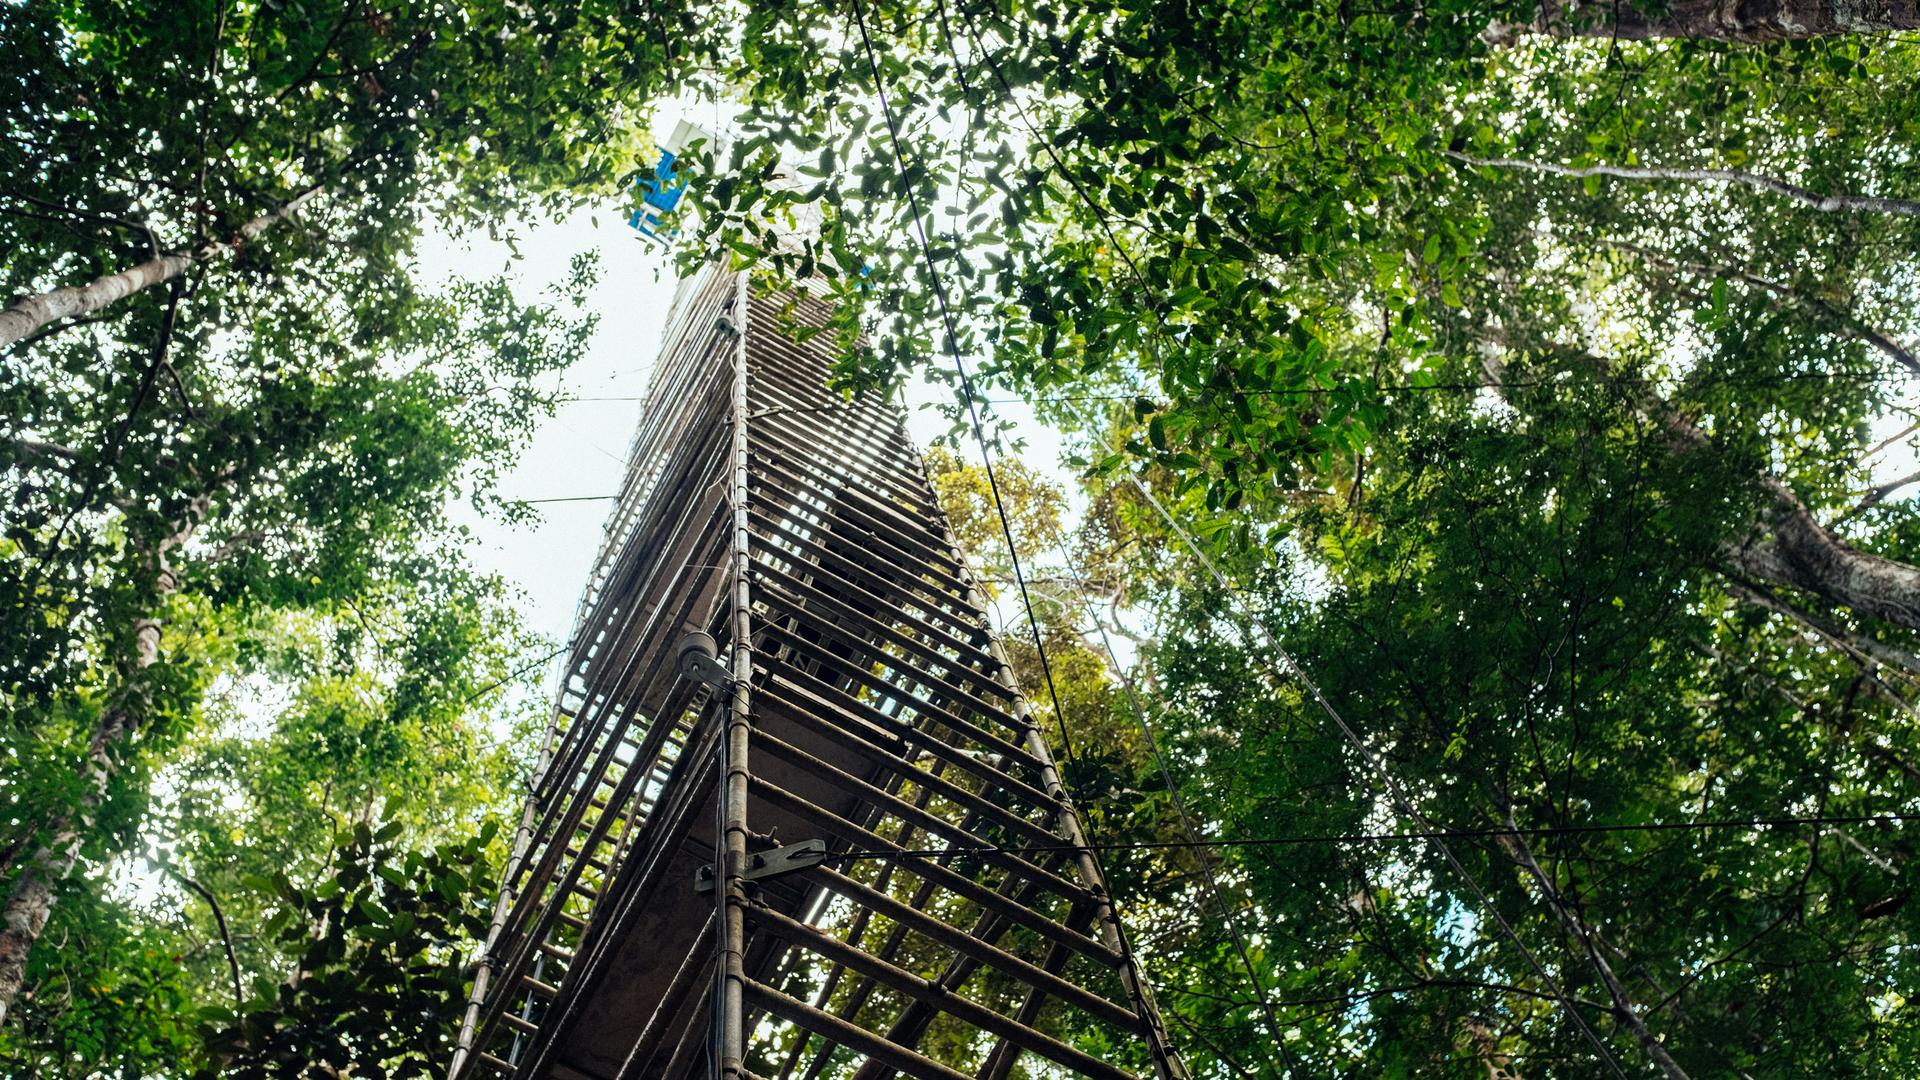 A tower of steel rises out of the dense jungle into the sky